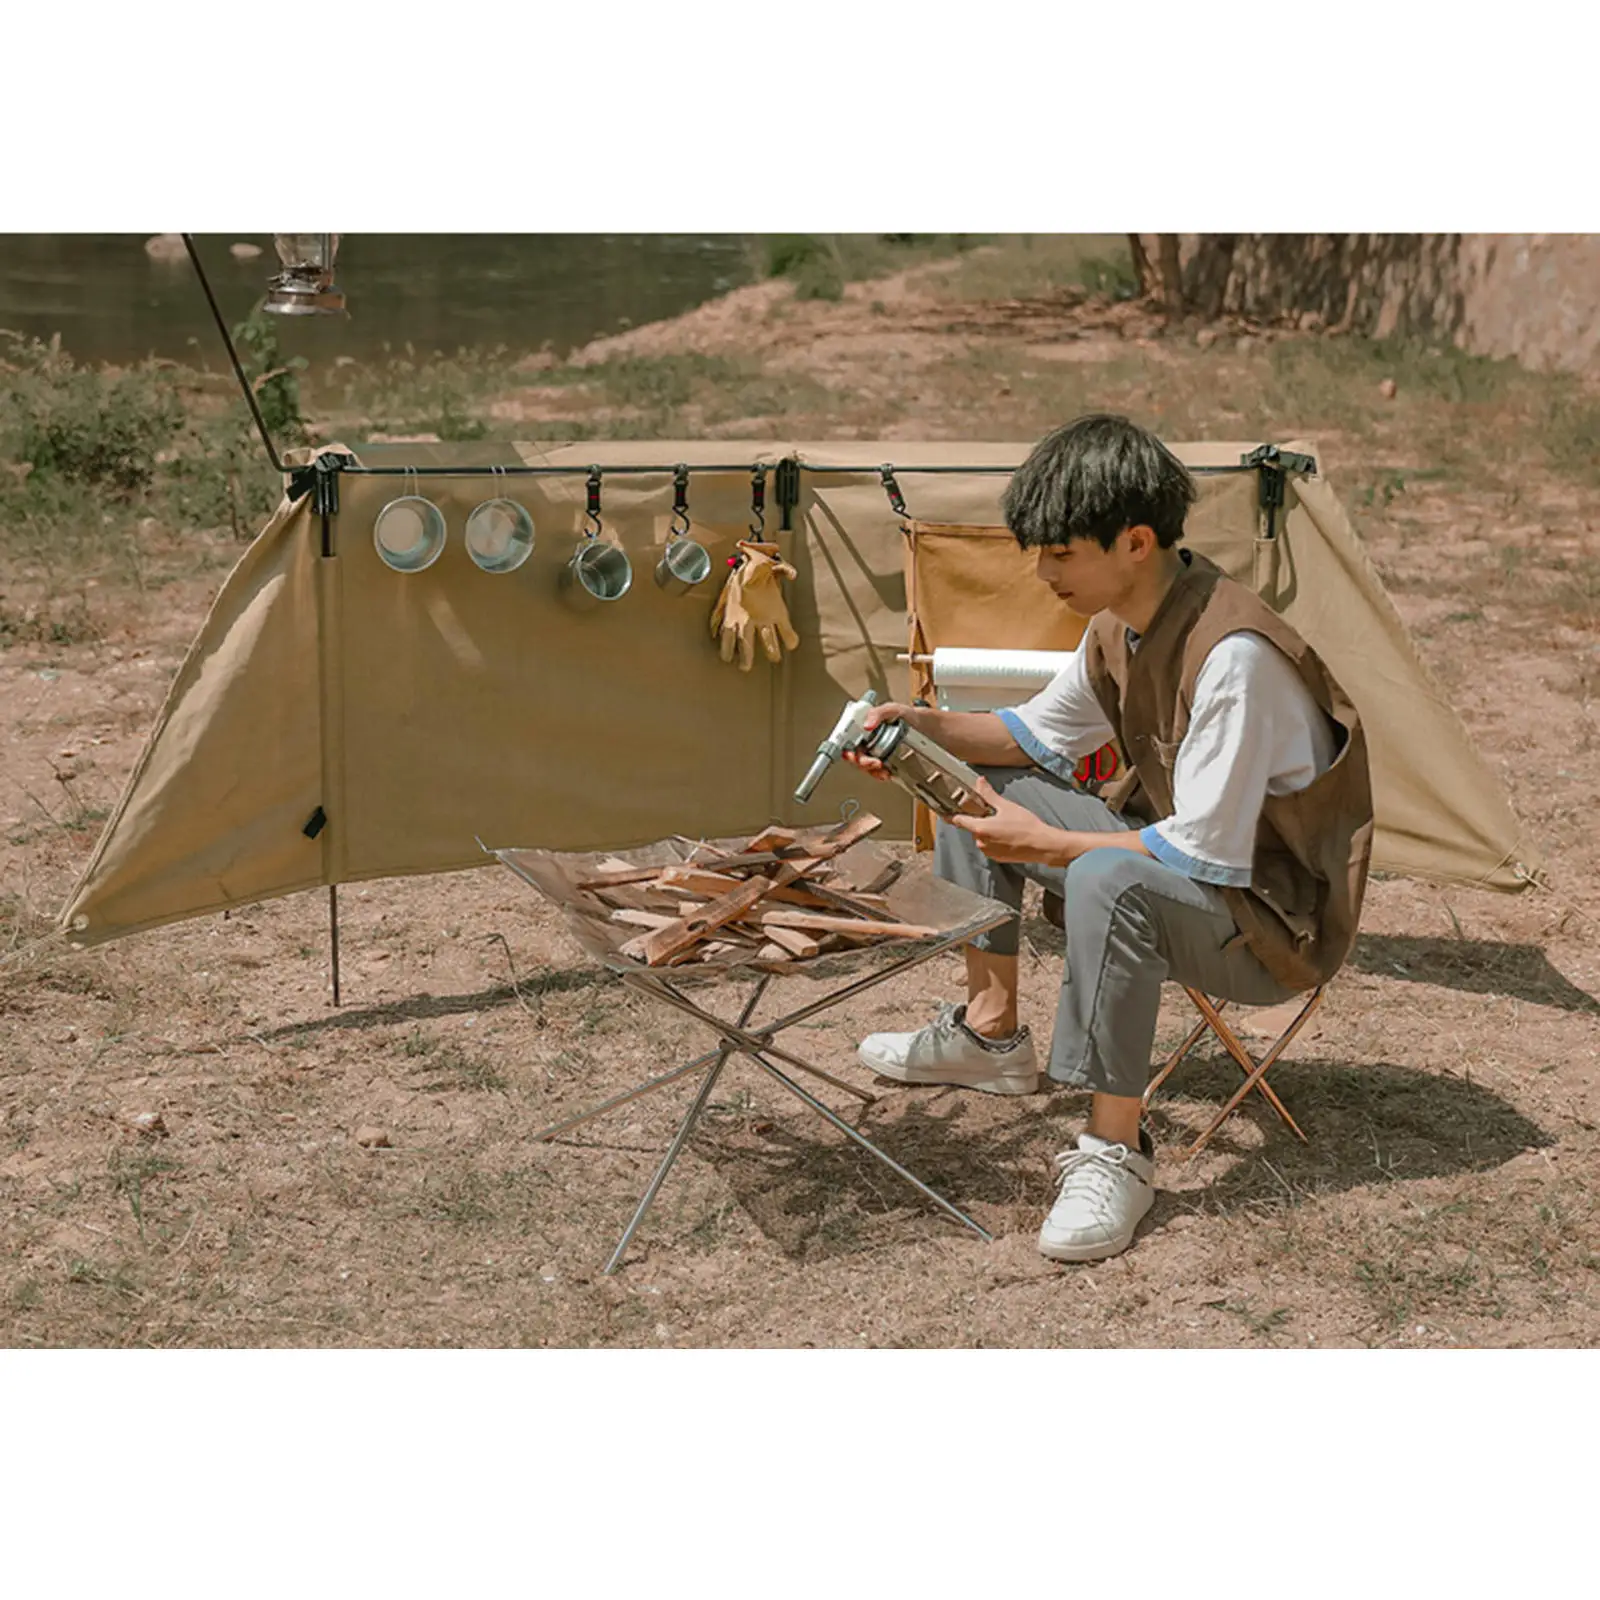 Portable Outdoor Camping Wind Shield Stand Fireproof Cooker Stove Canvas Windscreen Holder Barbecue Windshield